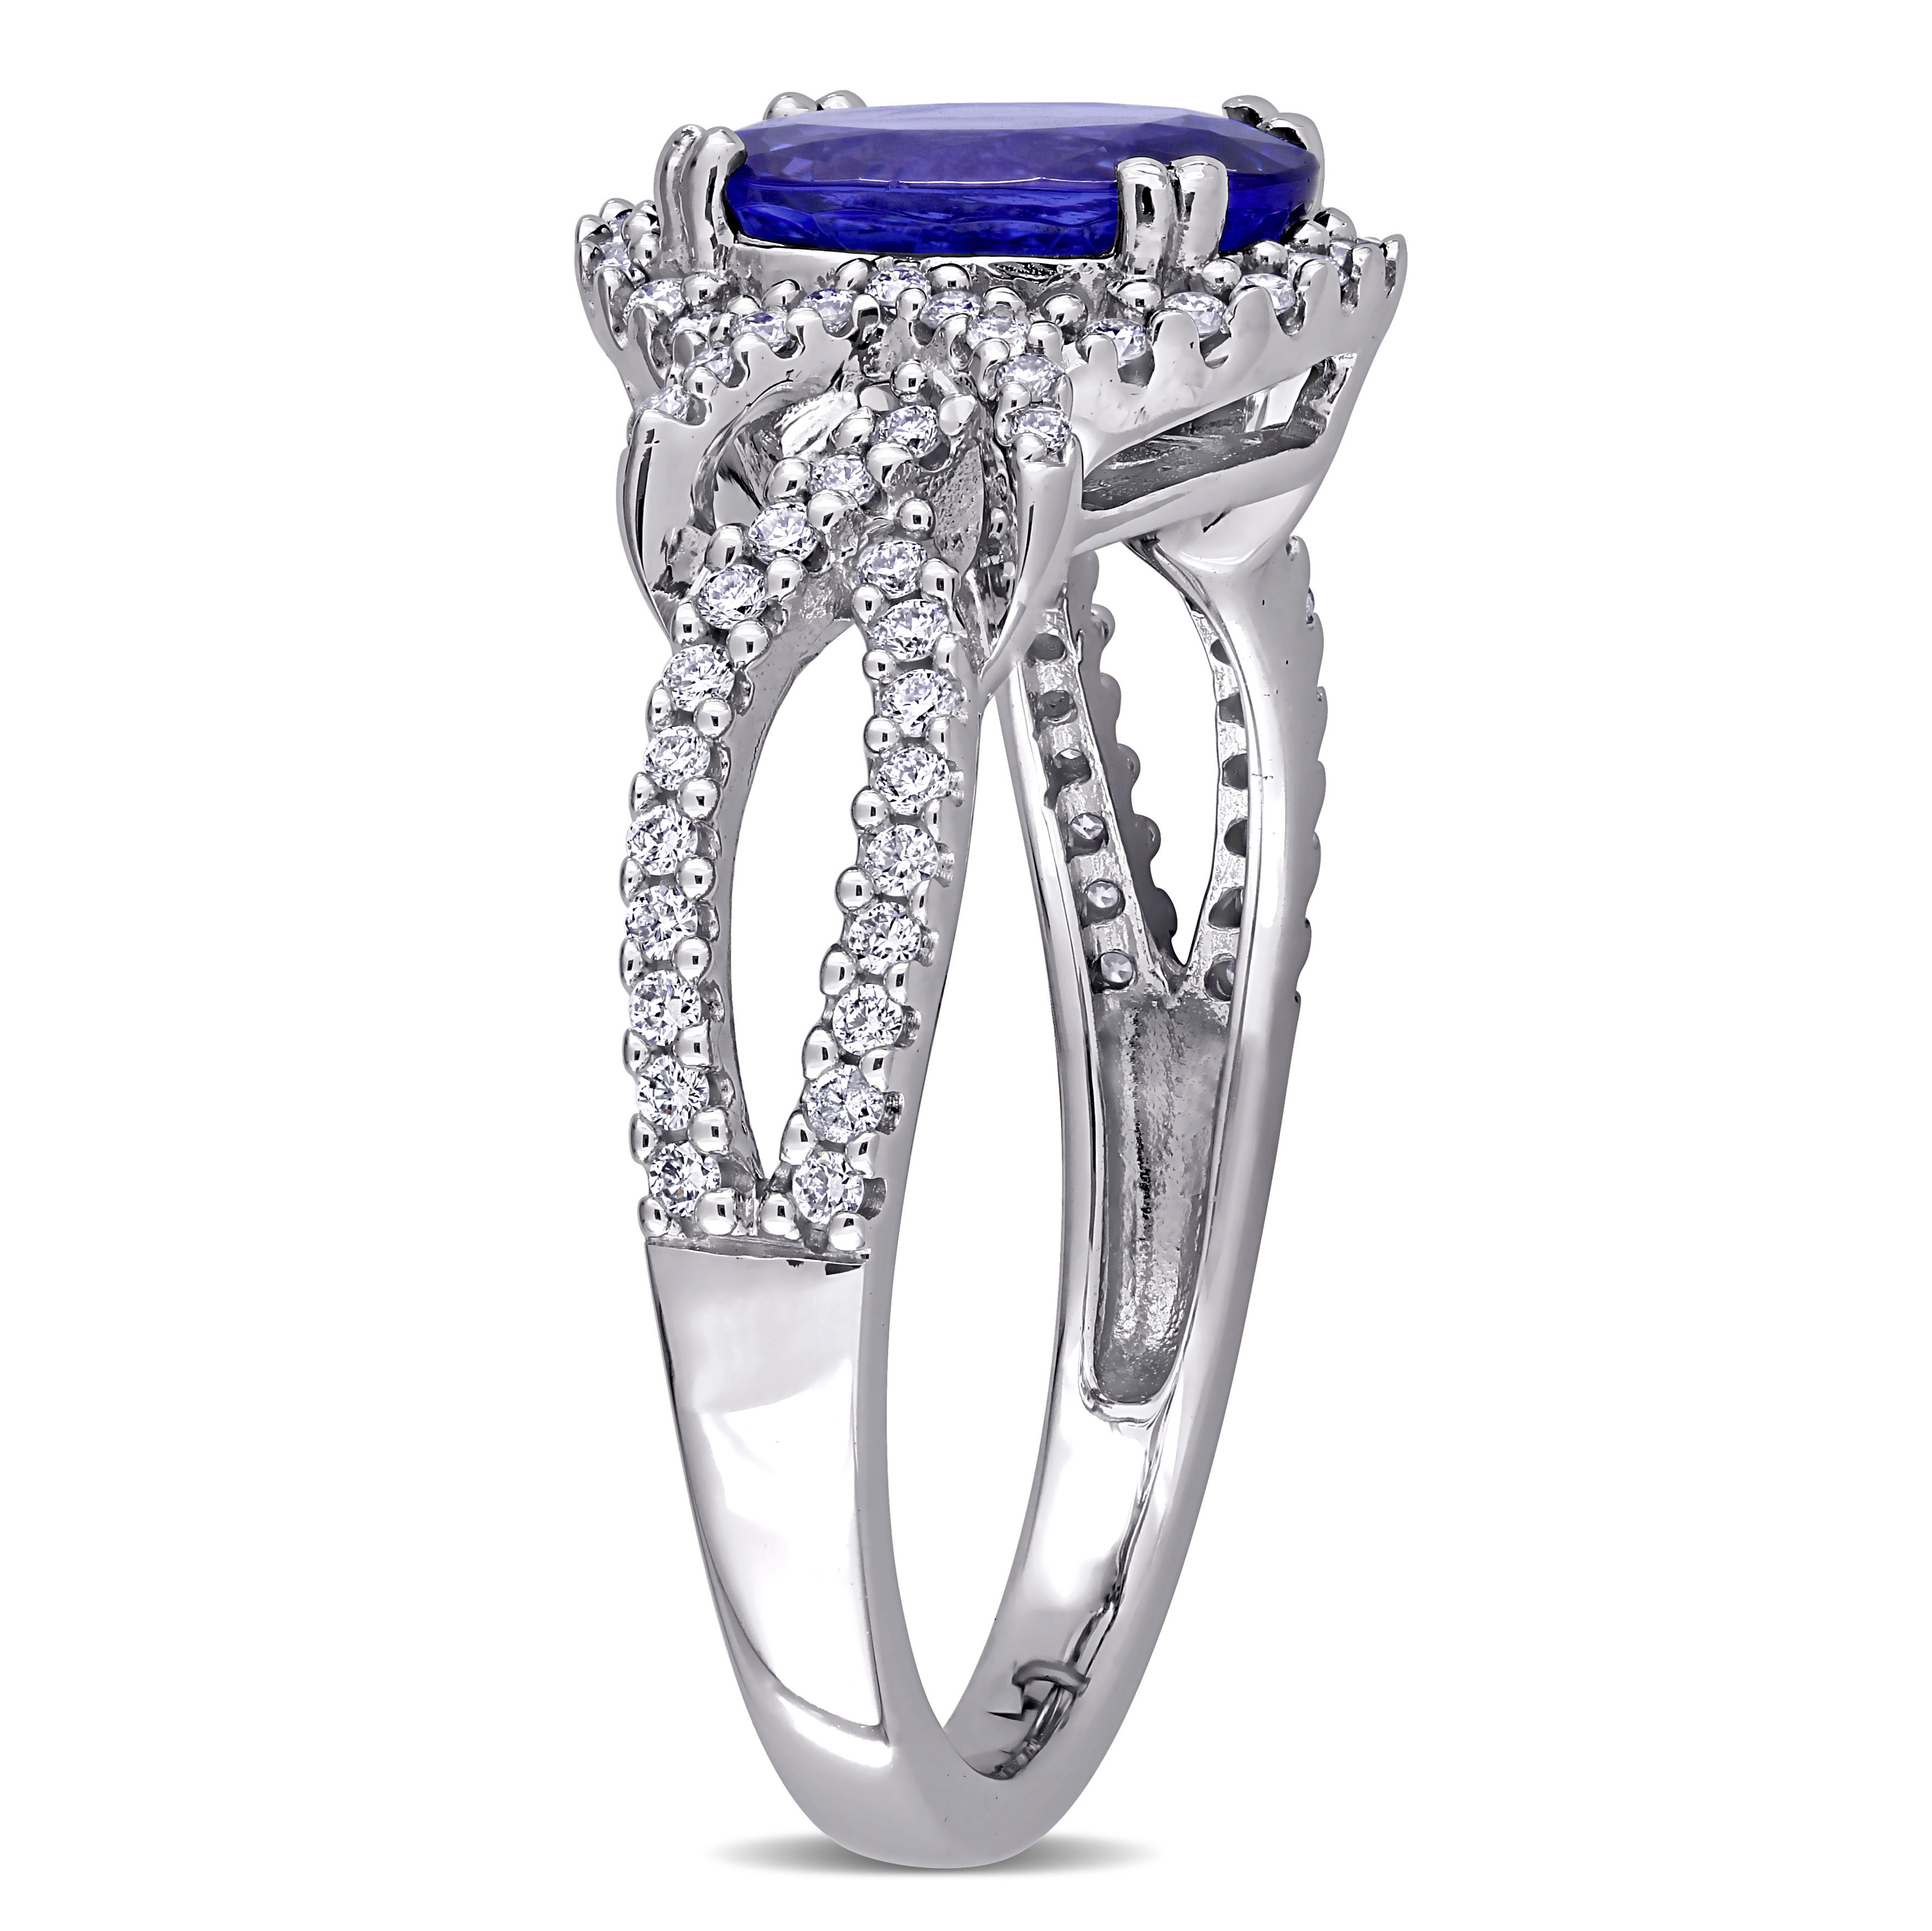 1 4/5 CT TGW Oval Shape Tanzanite and 1/3 CT TW Diamond Ring in 14k White Gold